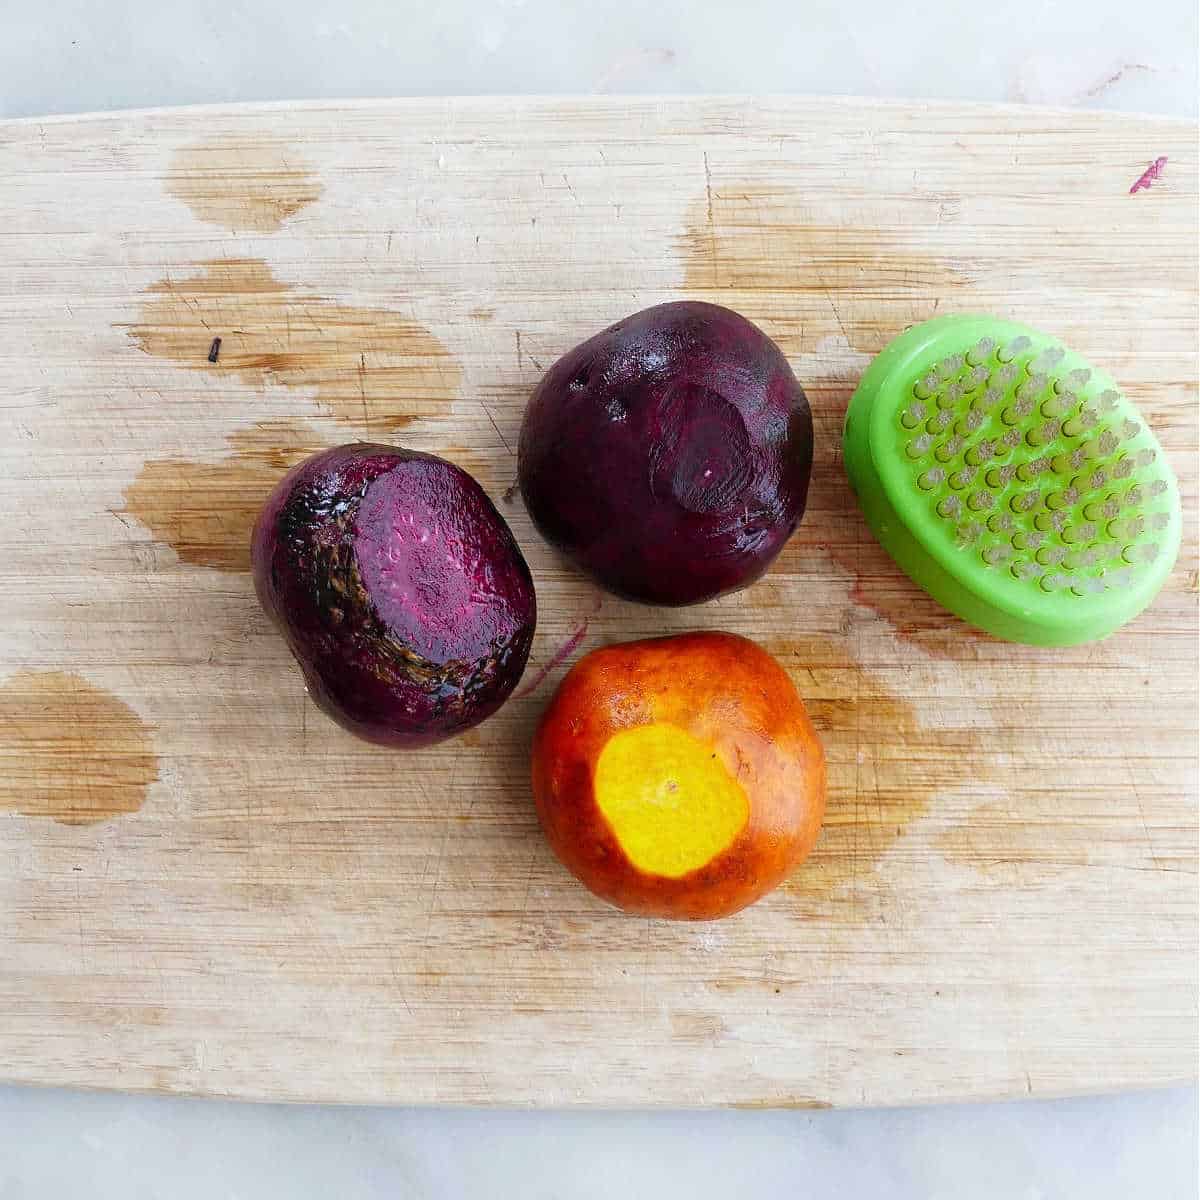 beets being scrubbed with a vegetable brush on a cutting board